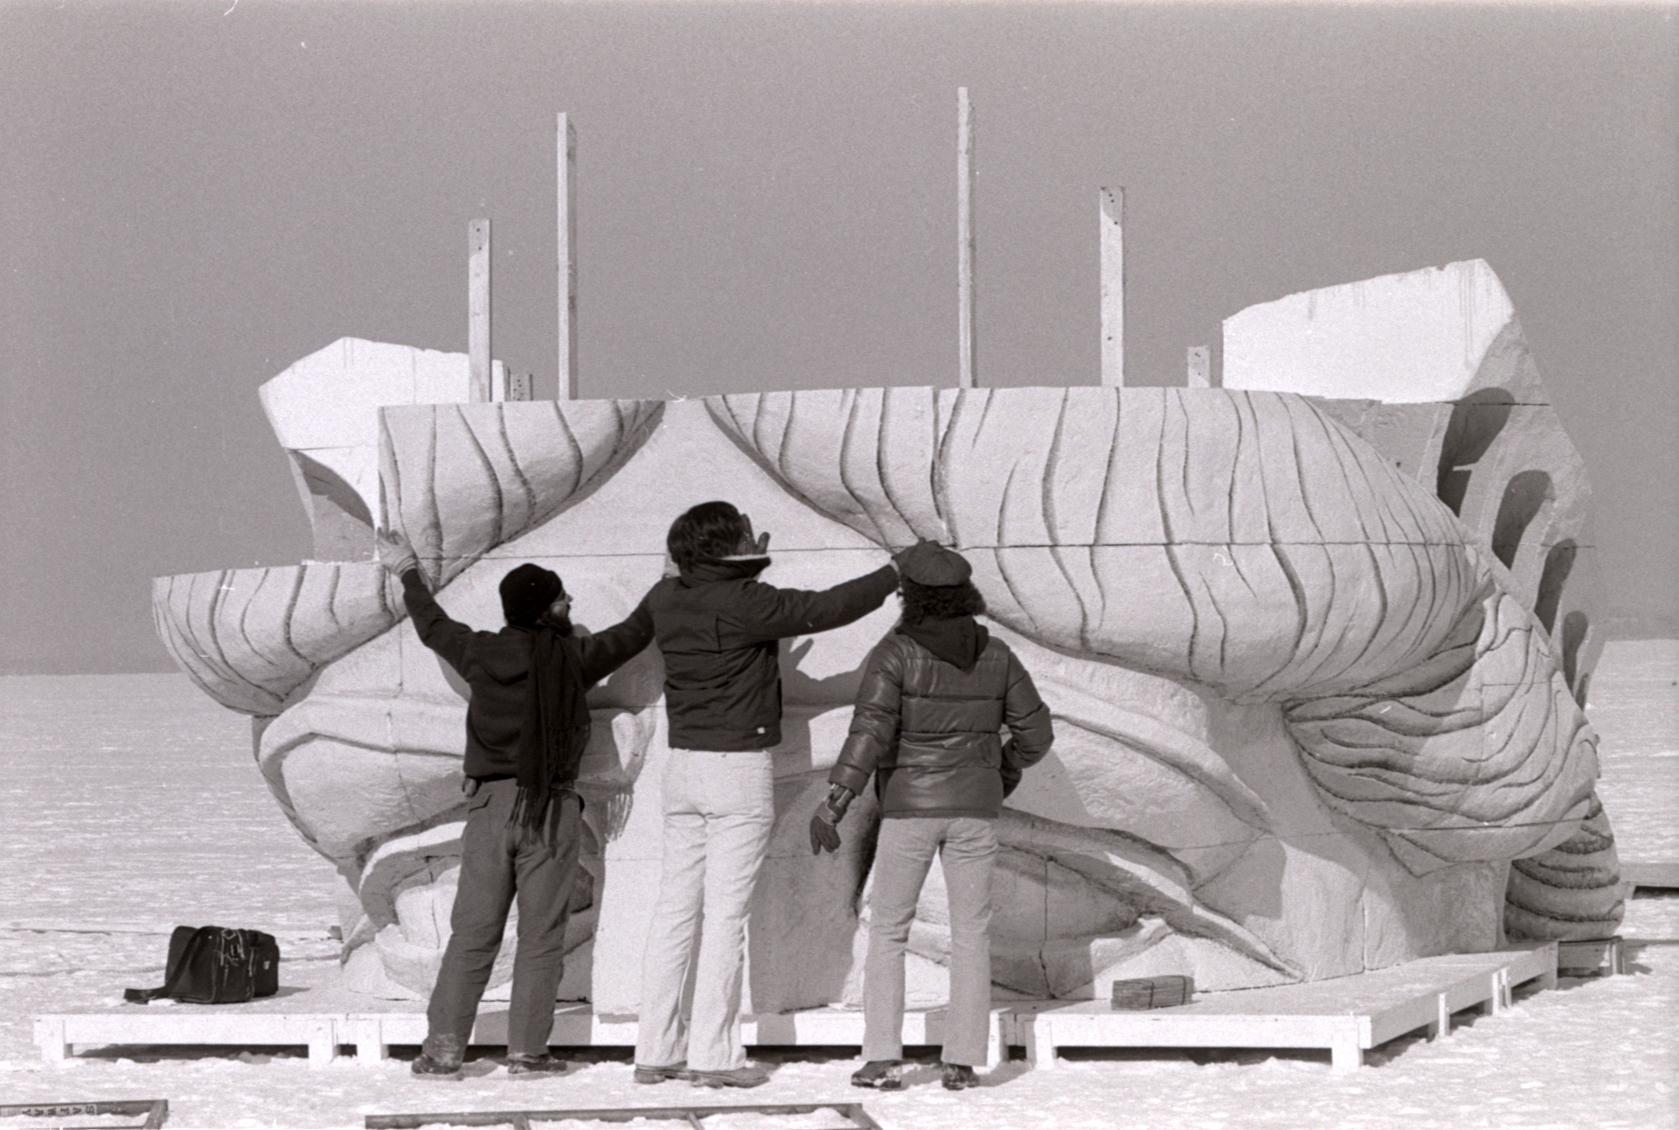 Assembling the Statue of Liberty